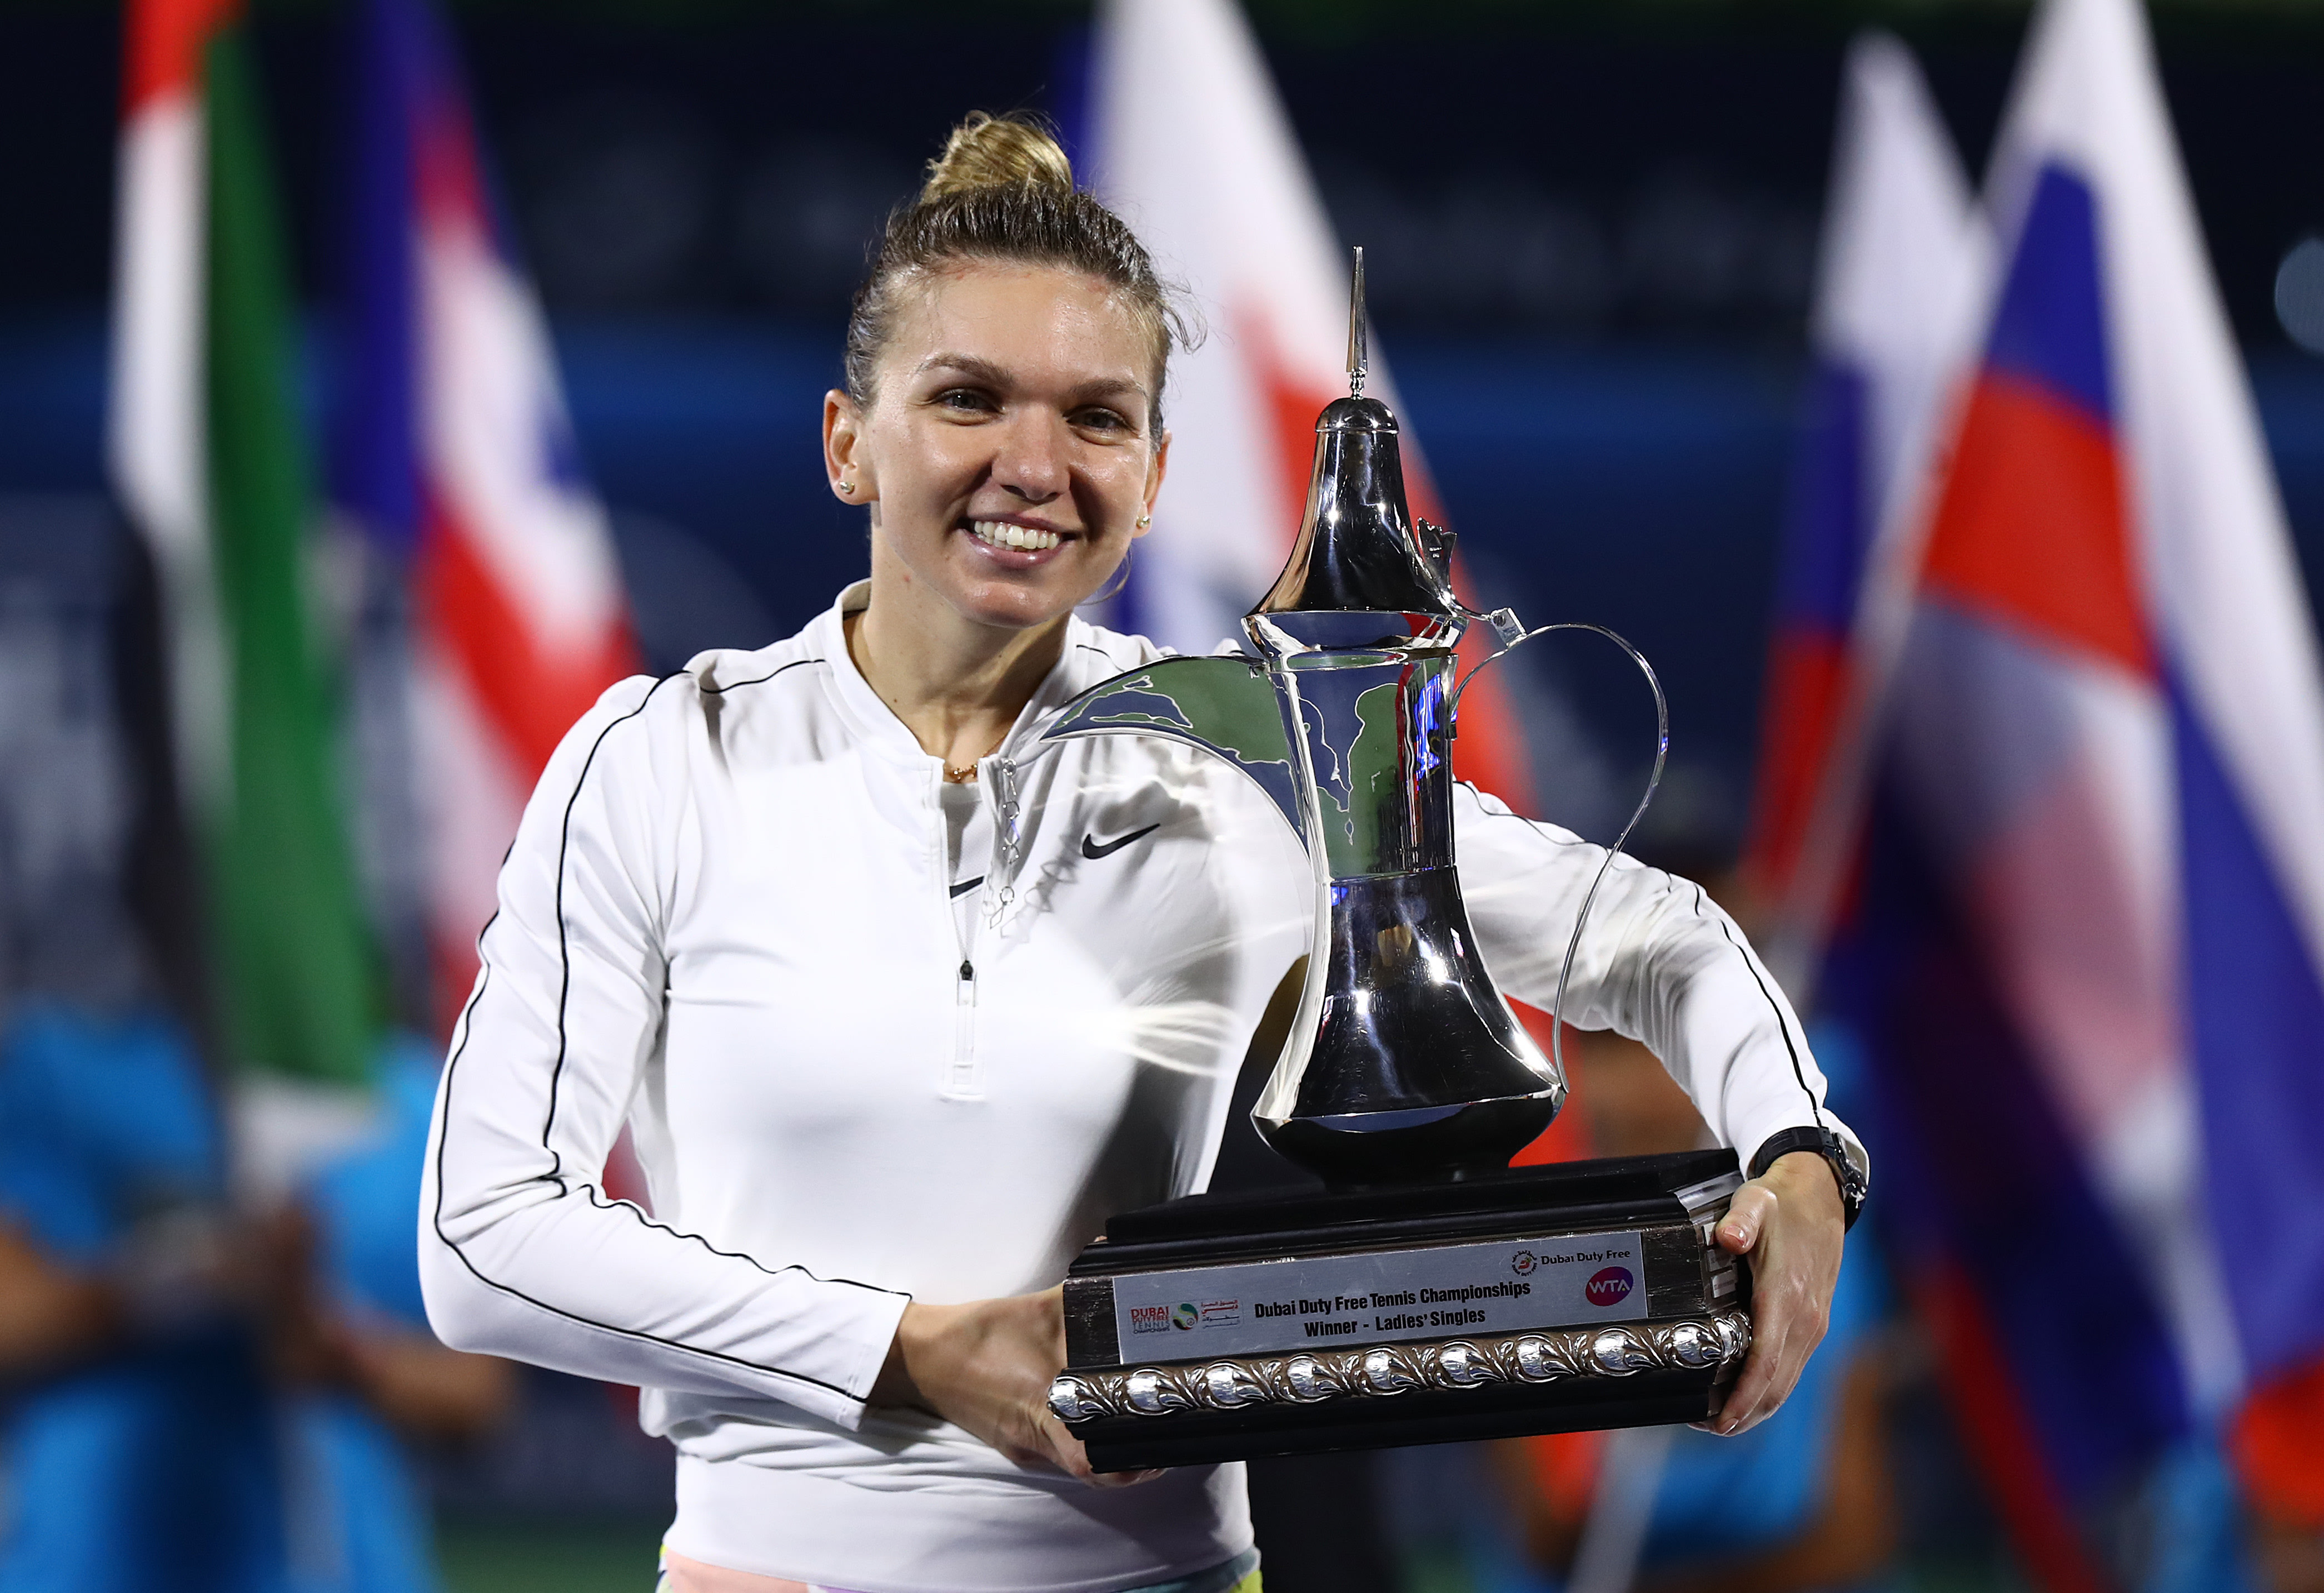 Halep picks up 20th WTA title by squeaking past Rybakina in Dubai